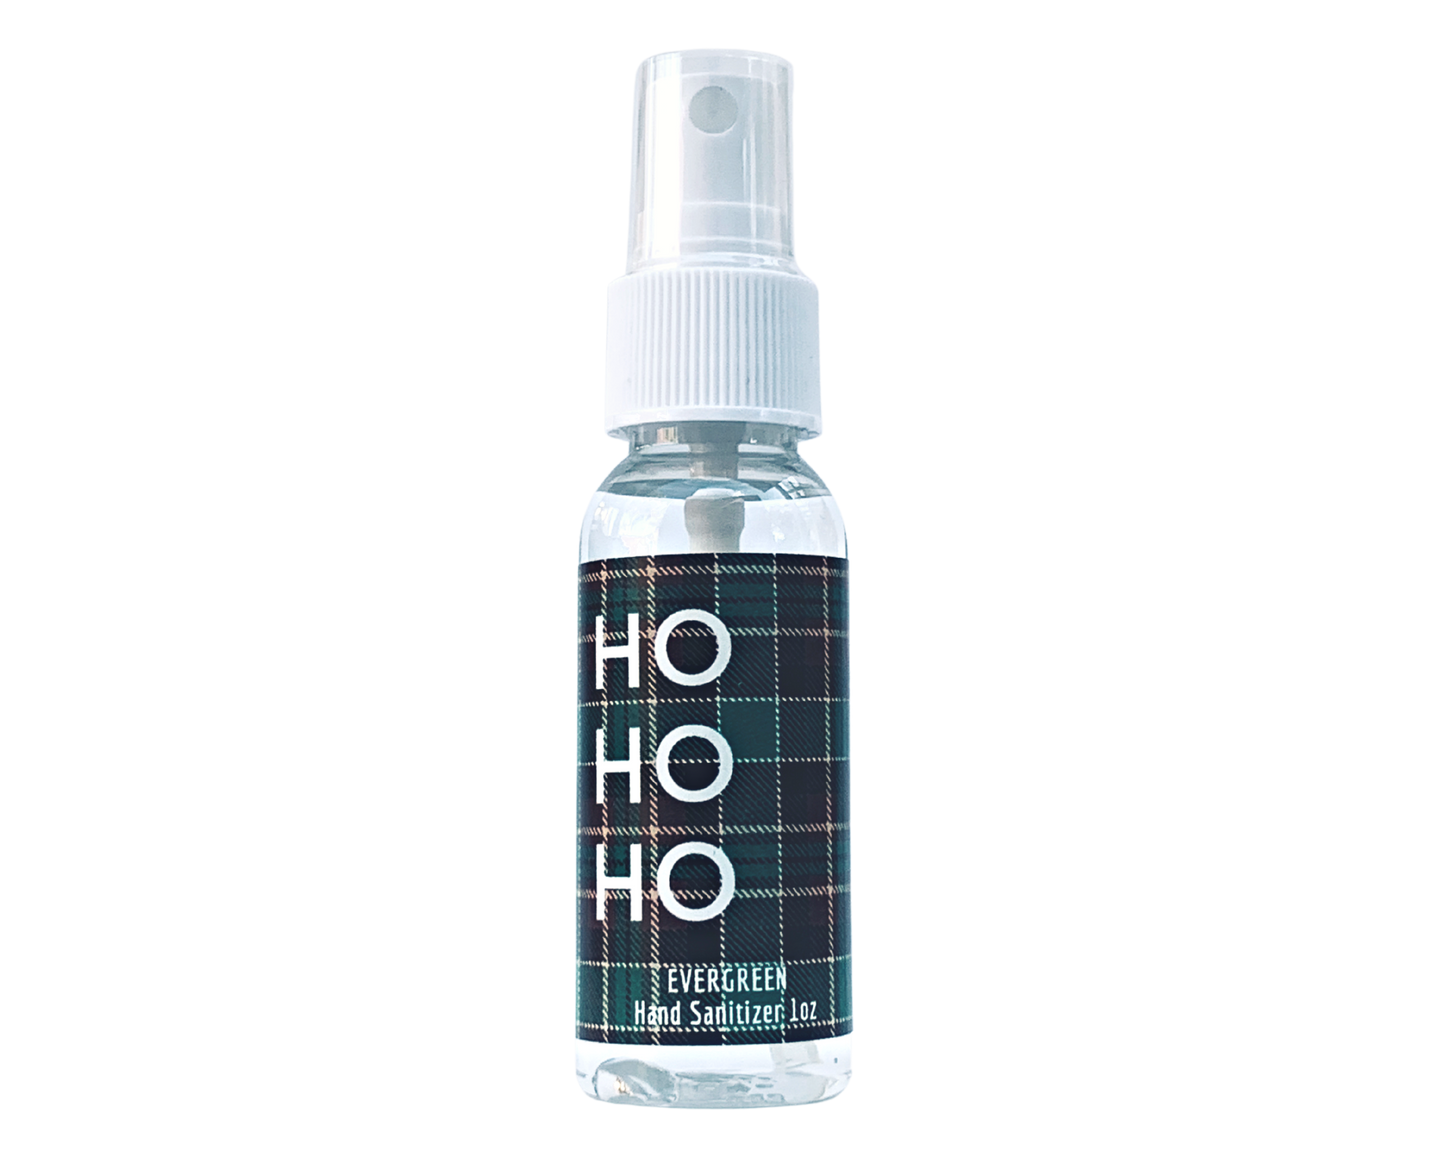 Christmas Hand Sanitizer Stocking Stuffers & Party Favors - Plaid Ho Ho Ho - with Aloe & Essential Oils by Sunshine & Sanitizer